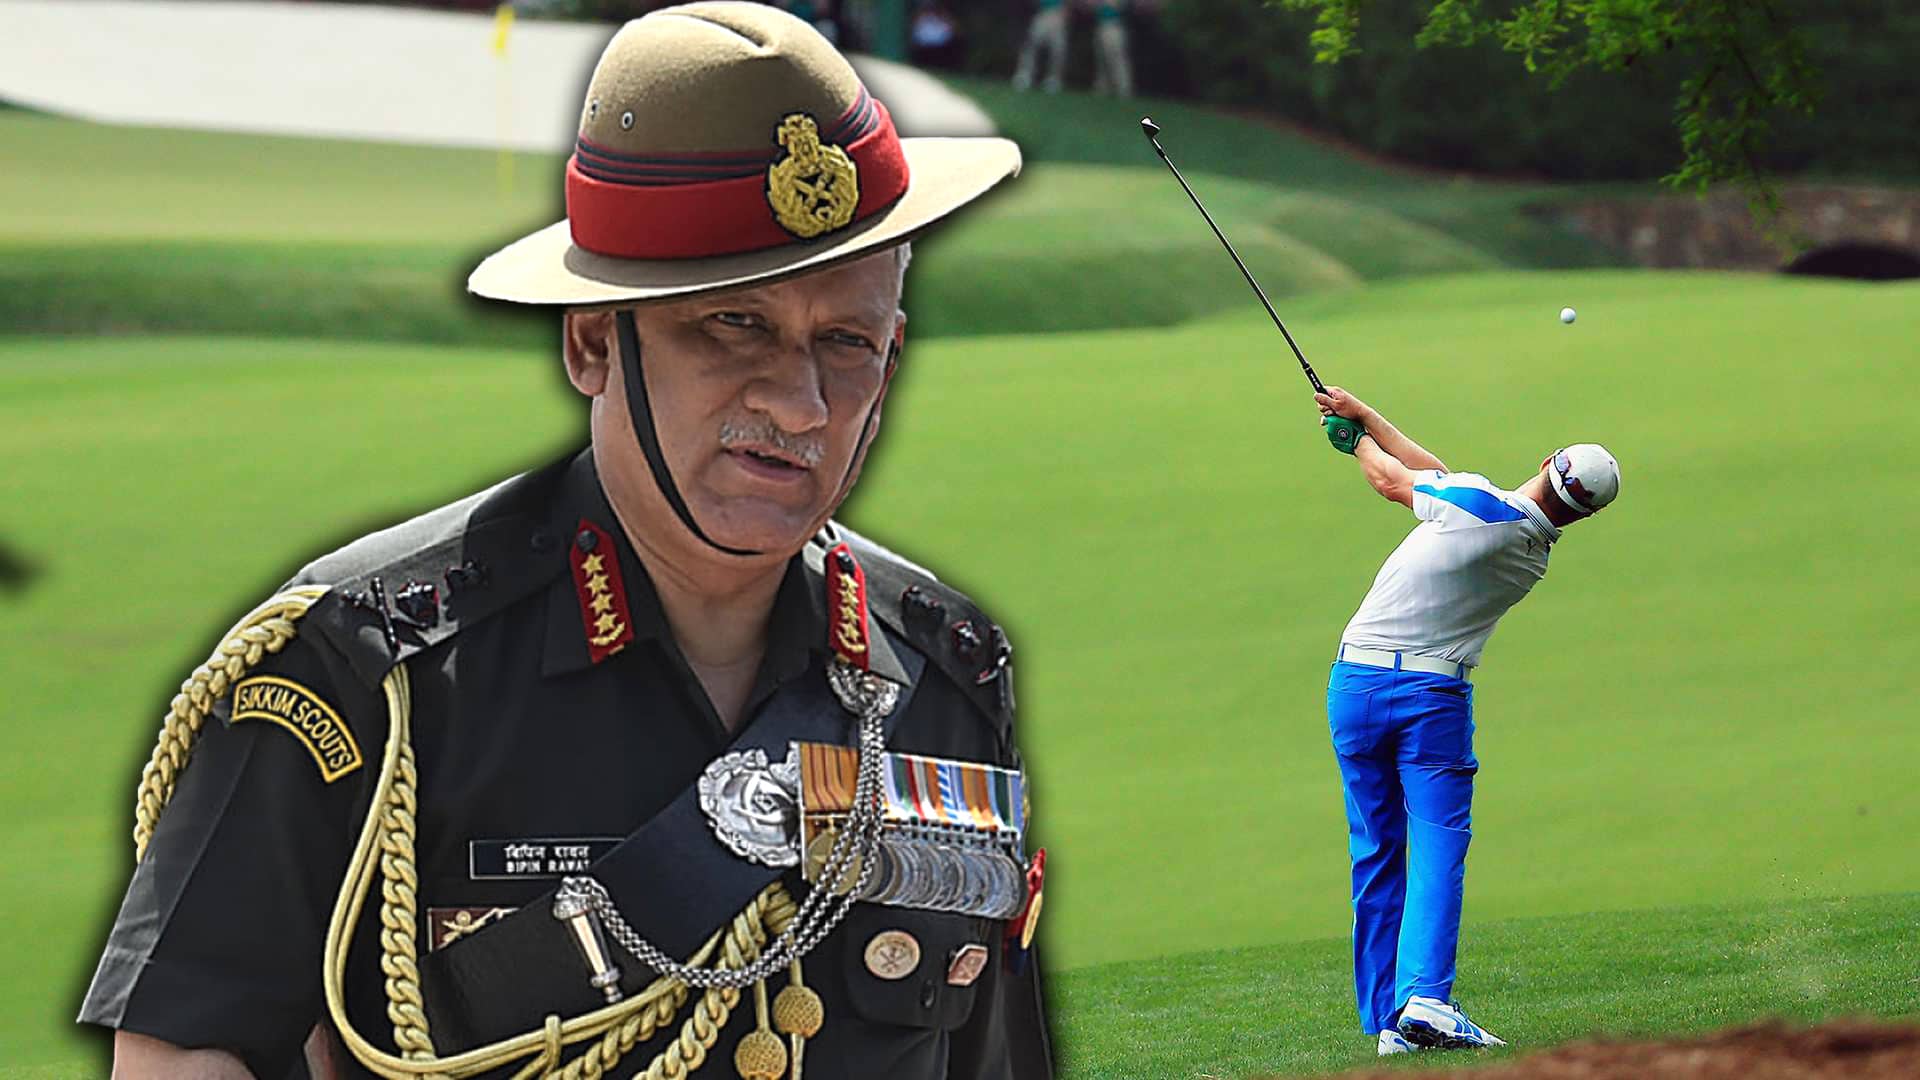 Golf 'banned' for officers in Kashmir to honour soldiers’ sacrifice